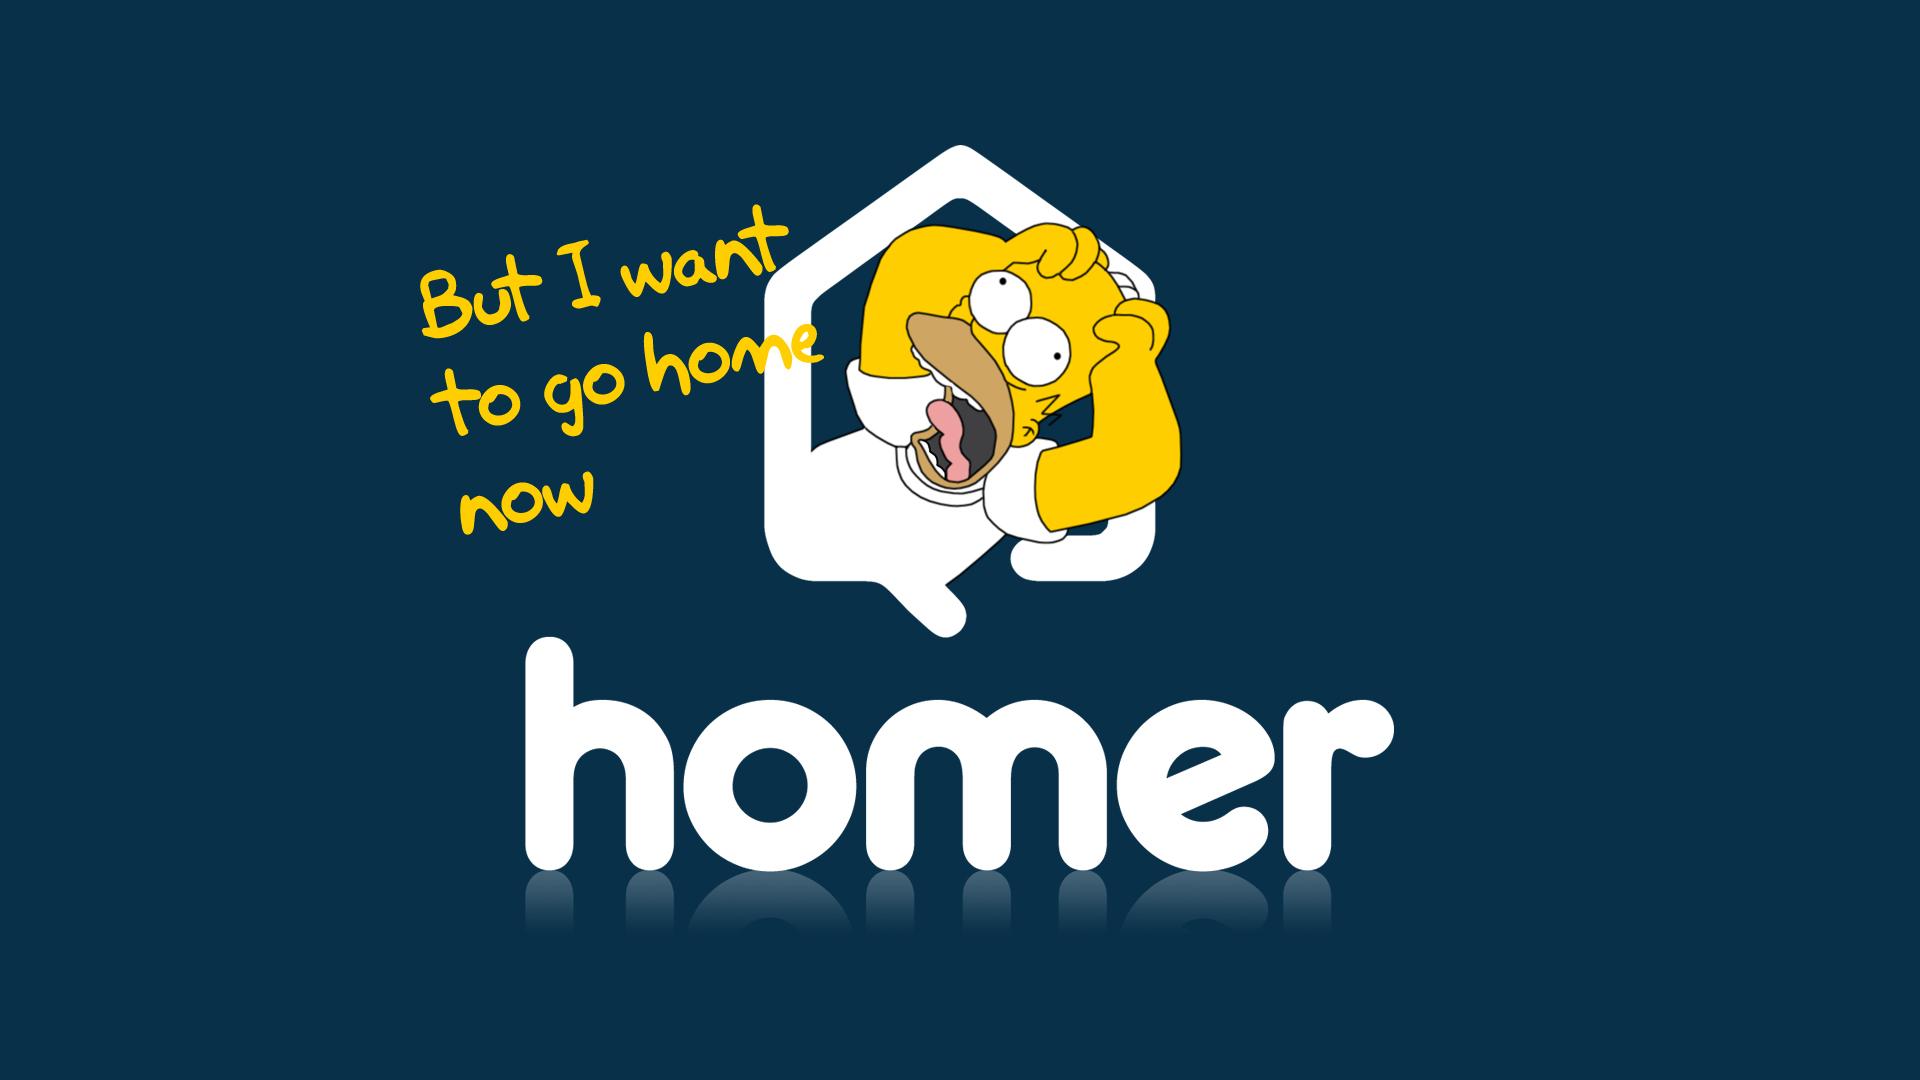 The Simpsons HD Wallpaper. Background Imagex1080